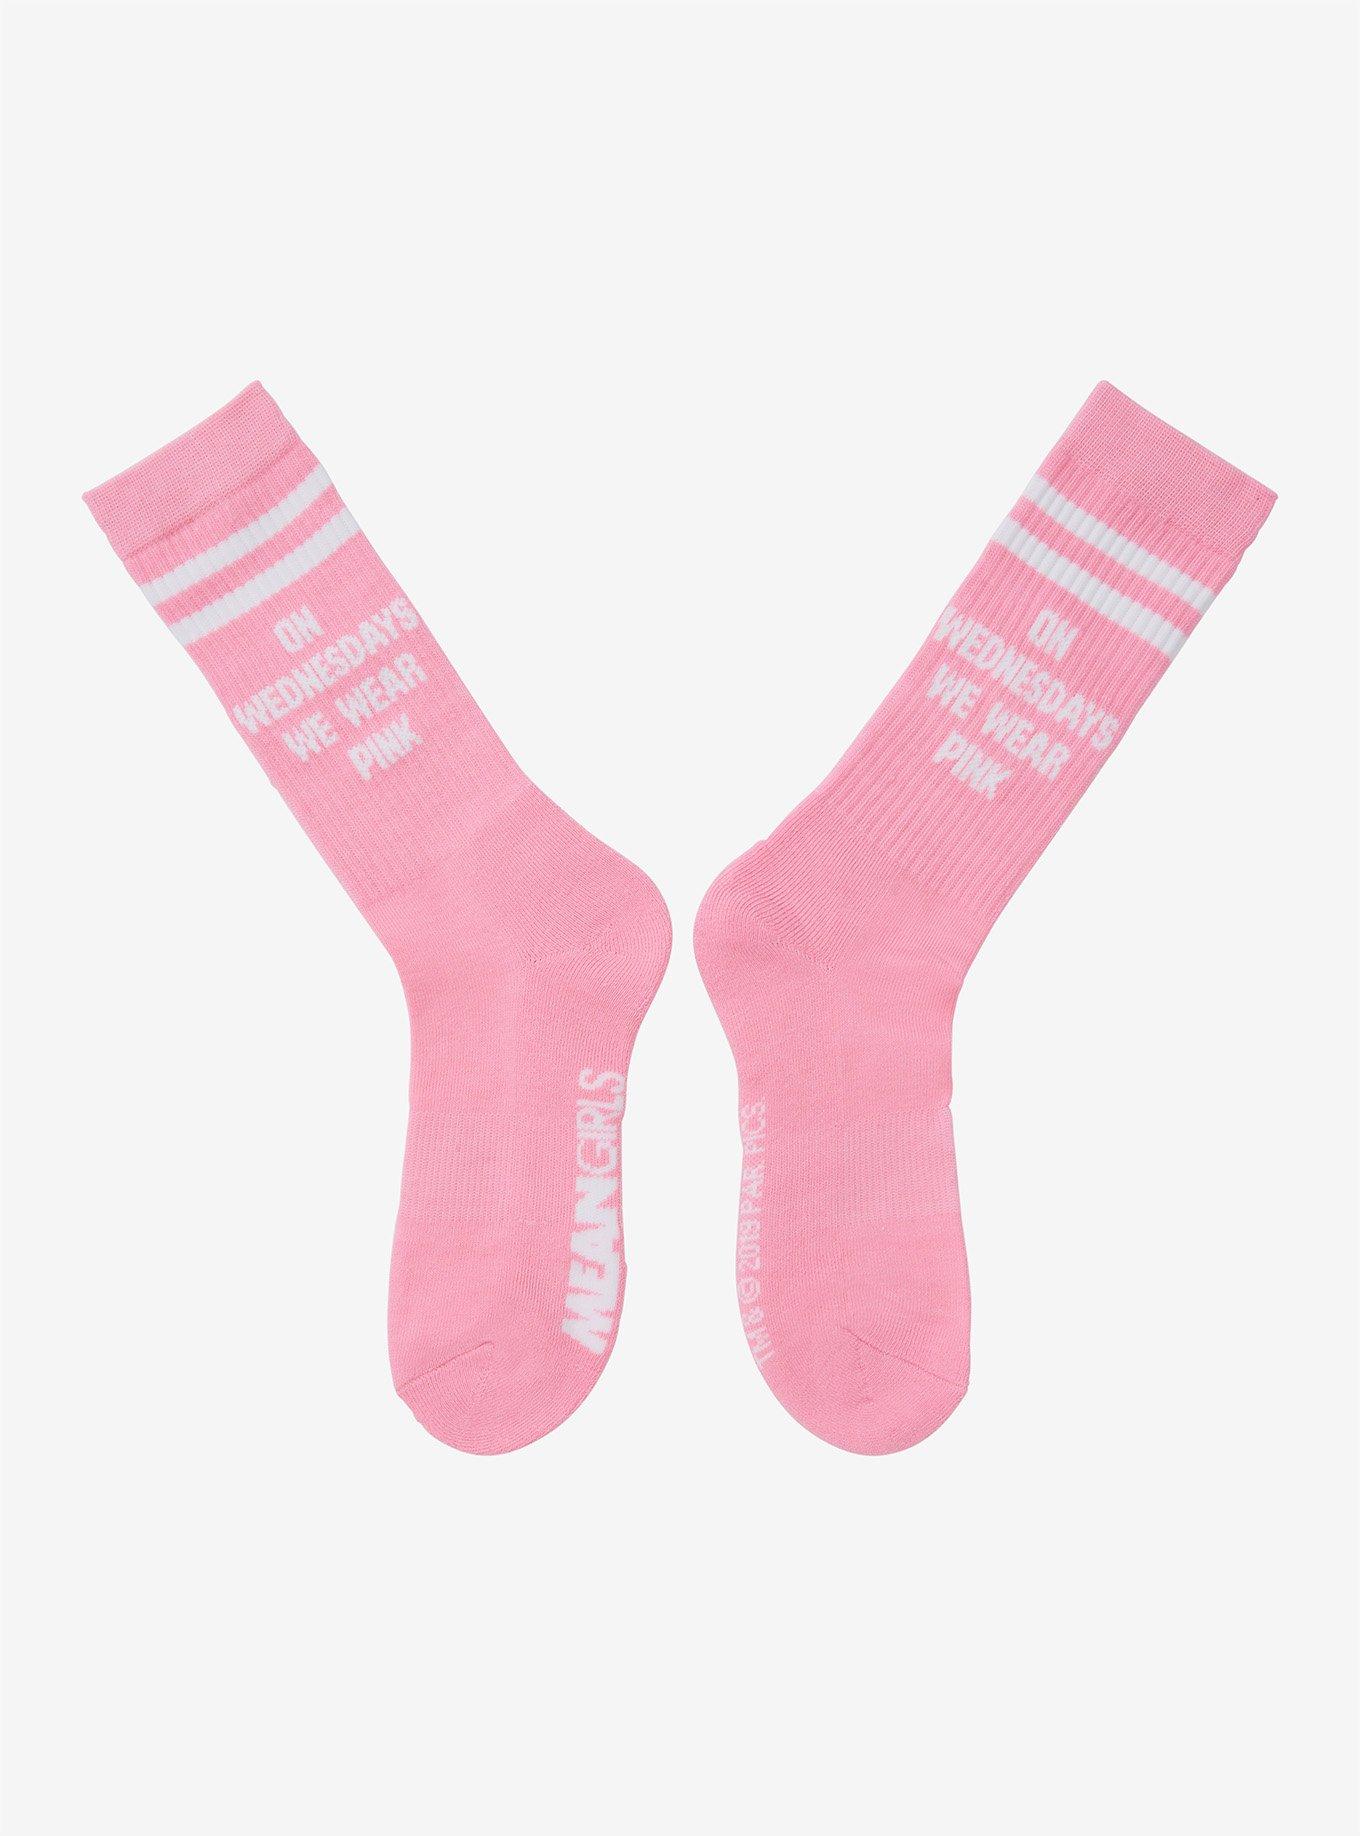 Mean Girls 'On Wednesdays We Wear Pink' Crew Socks - One Size Fits Most -  New